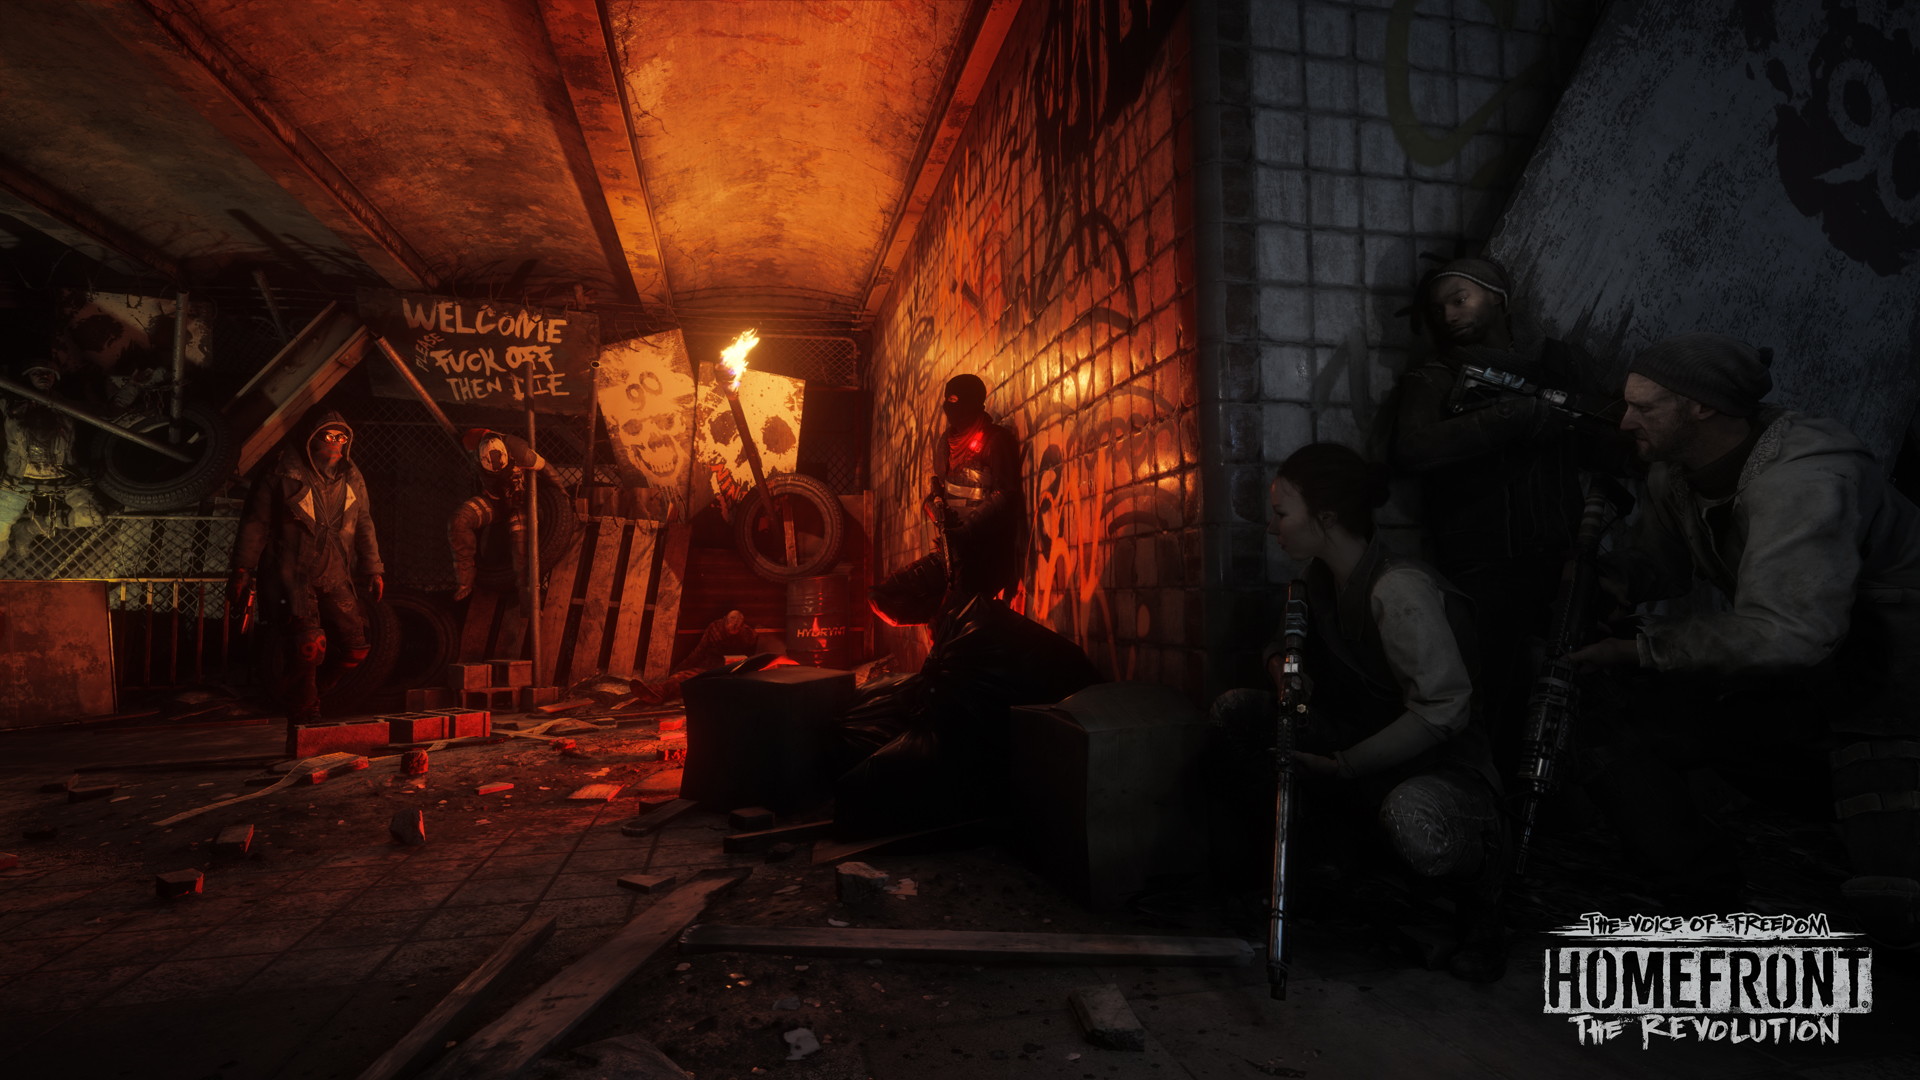 Homefront: The Revolution - The Voice of Freedom - screenshot 4